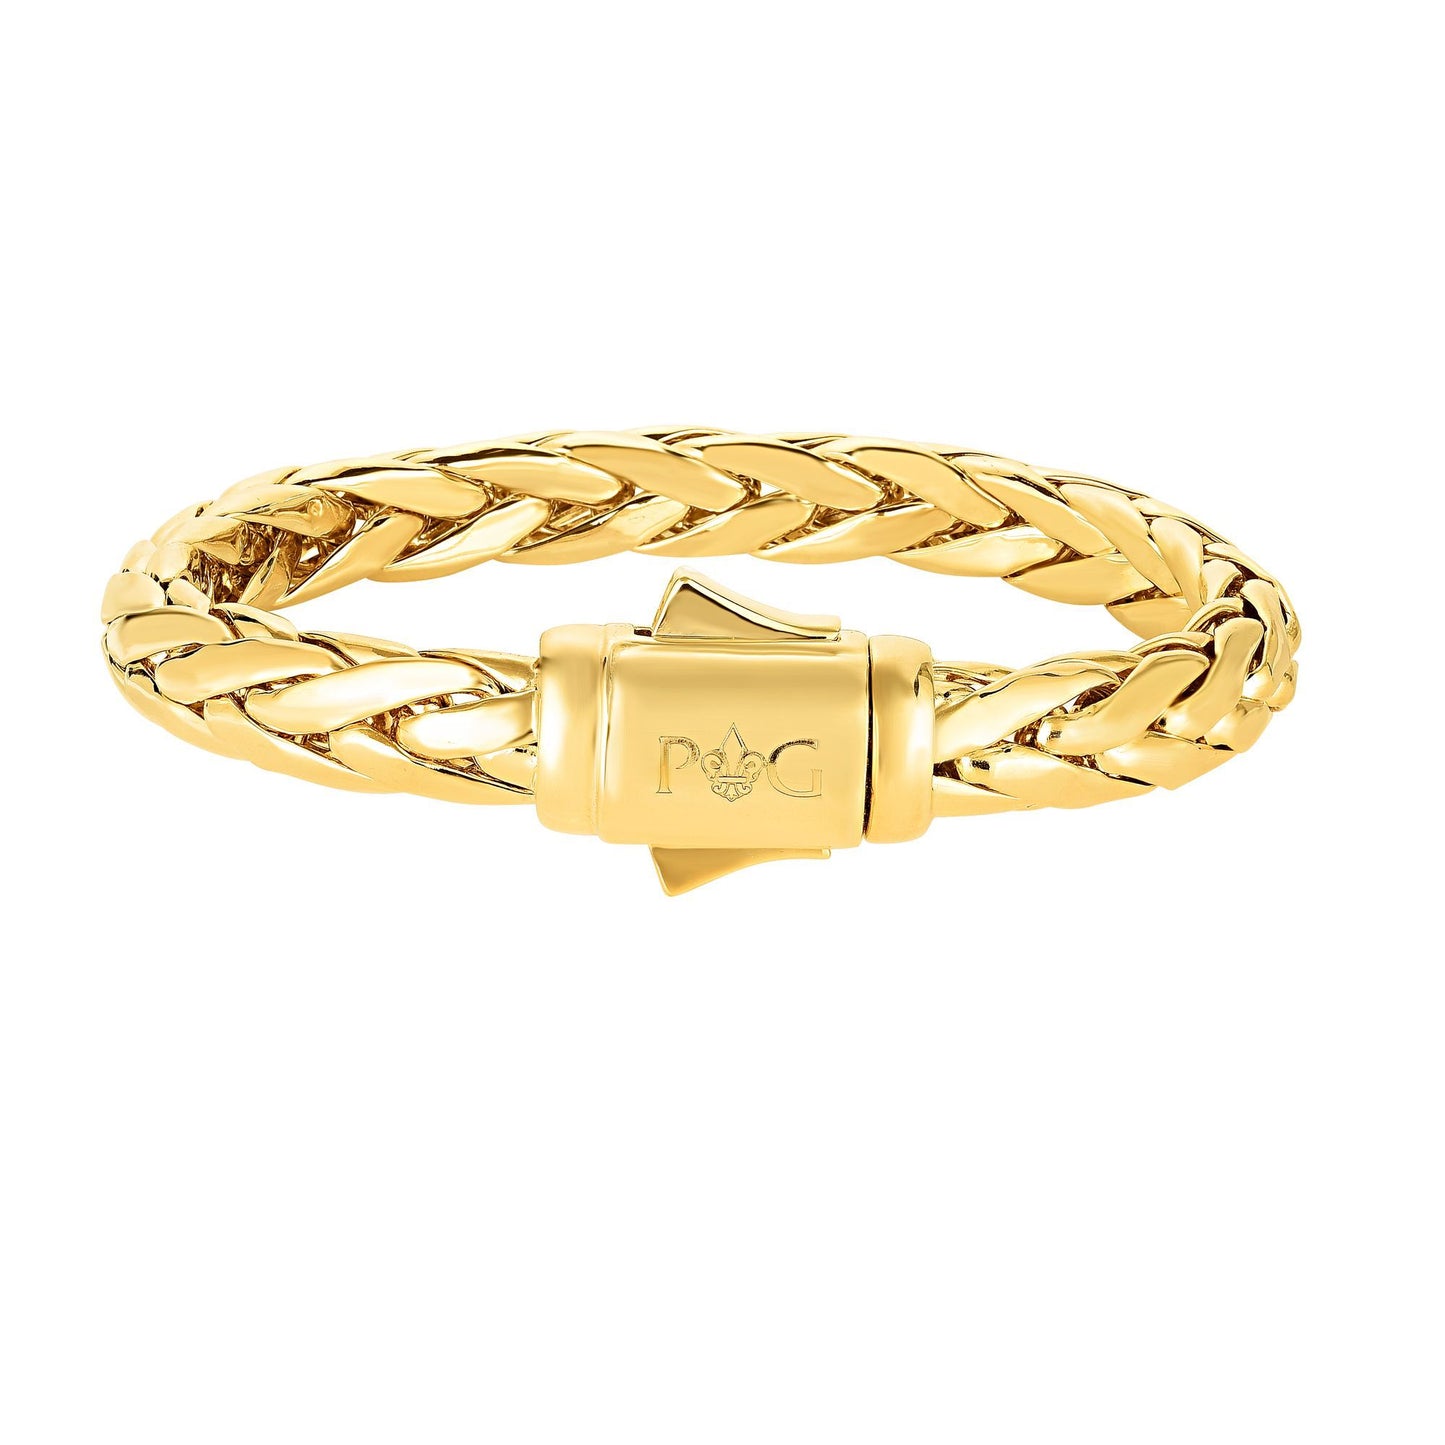 14K Gold Heritage Yellow Finish Dome Woven Bracelet with Box Clasp